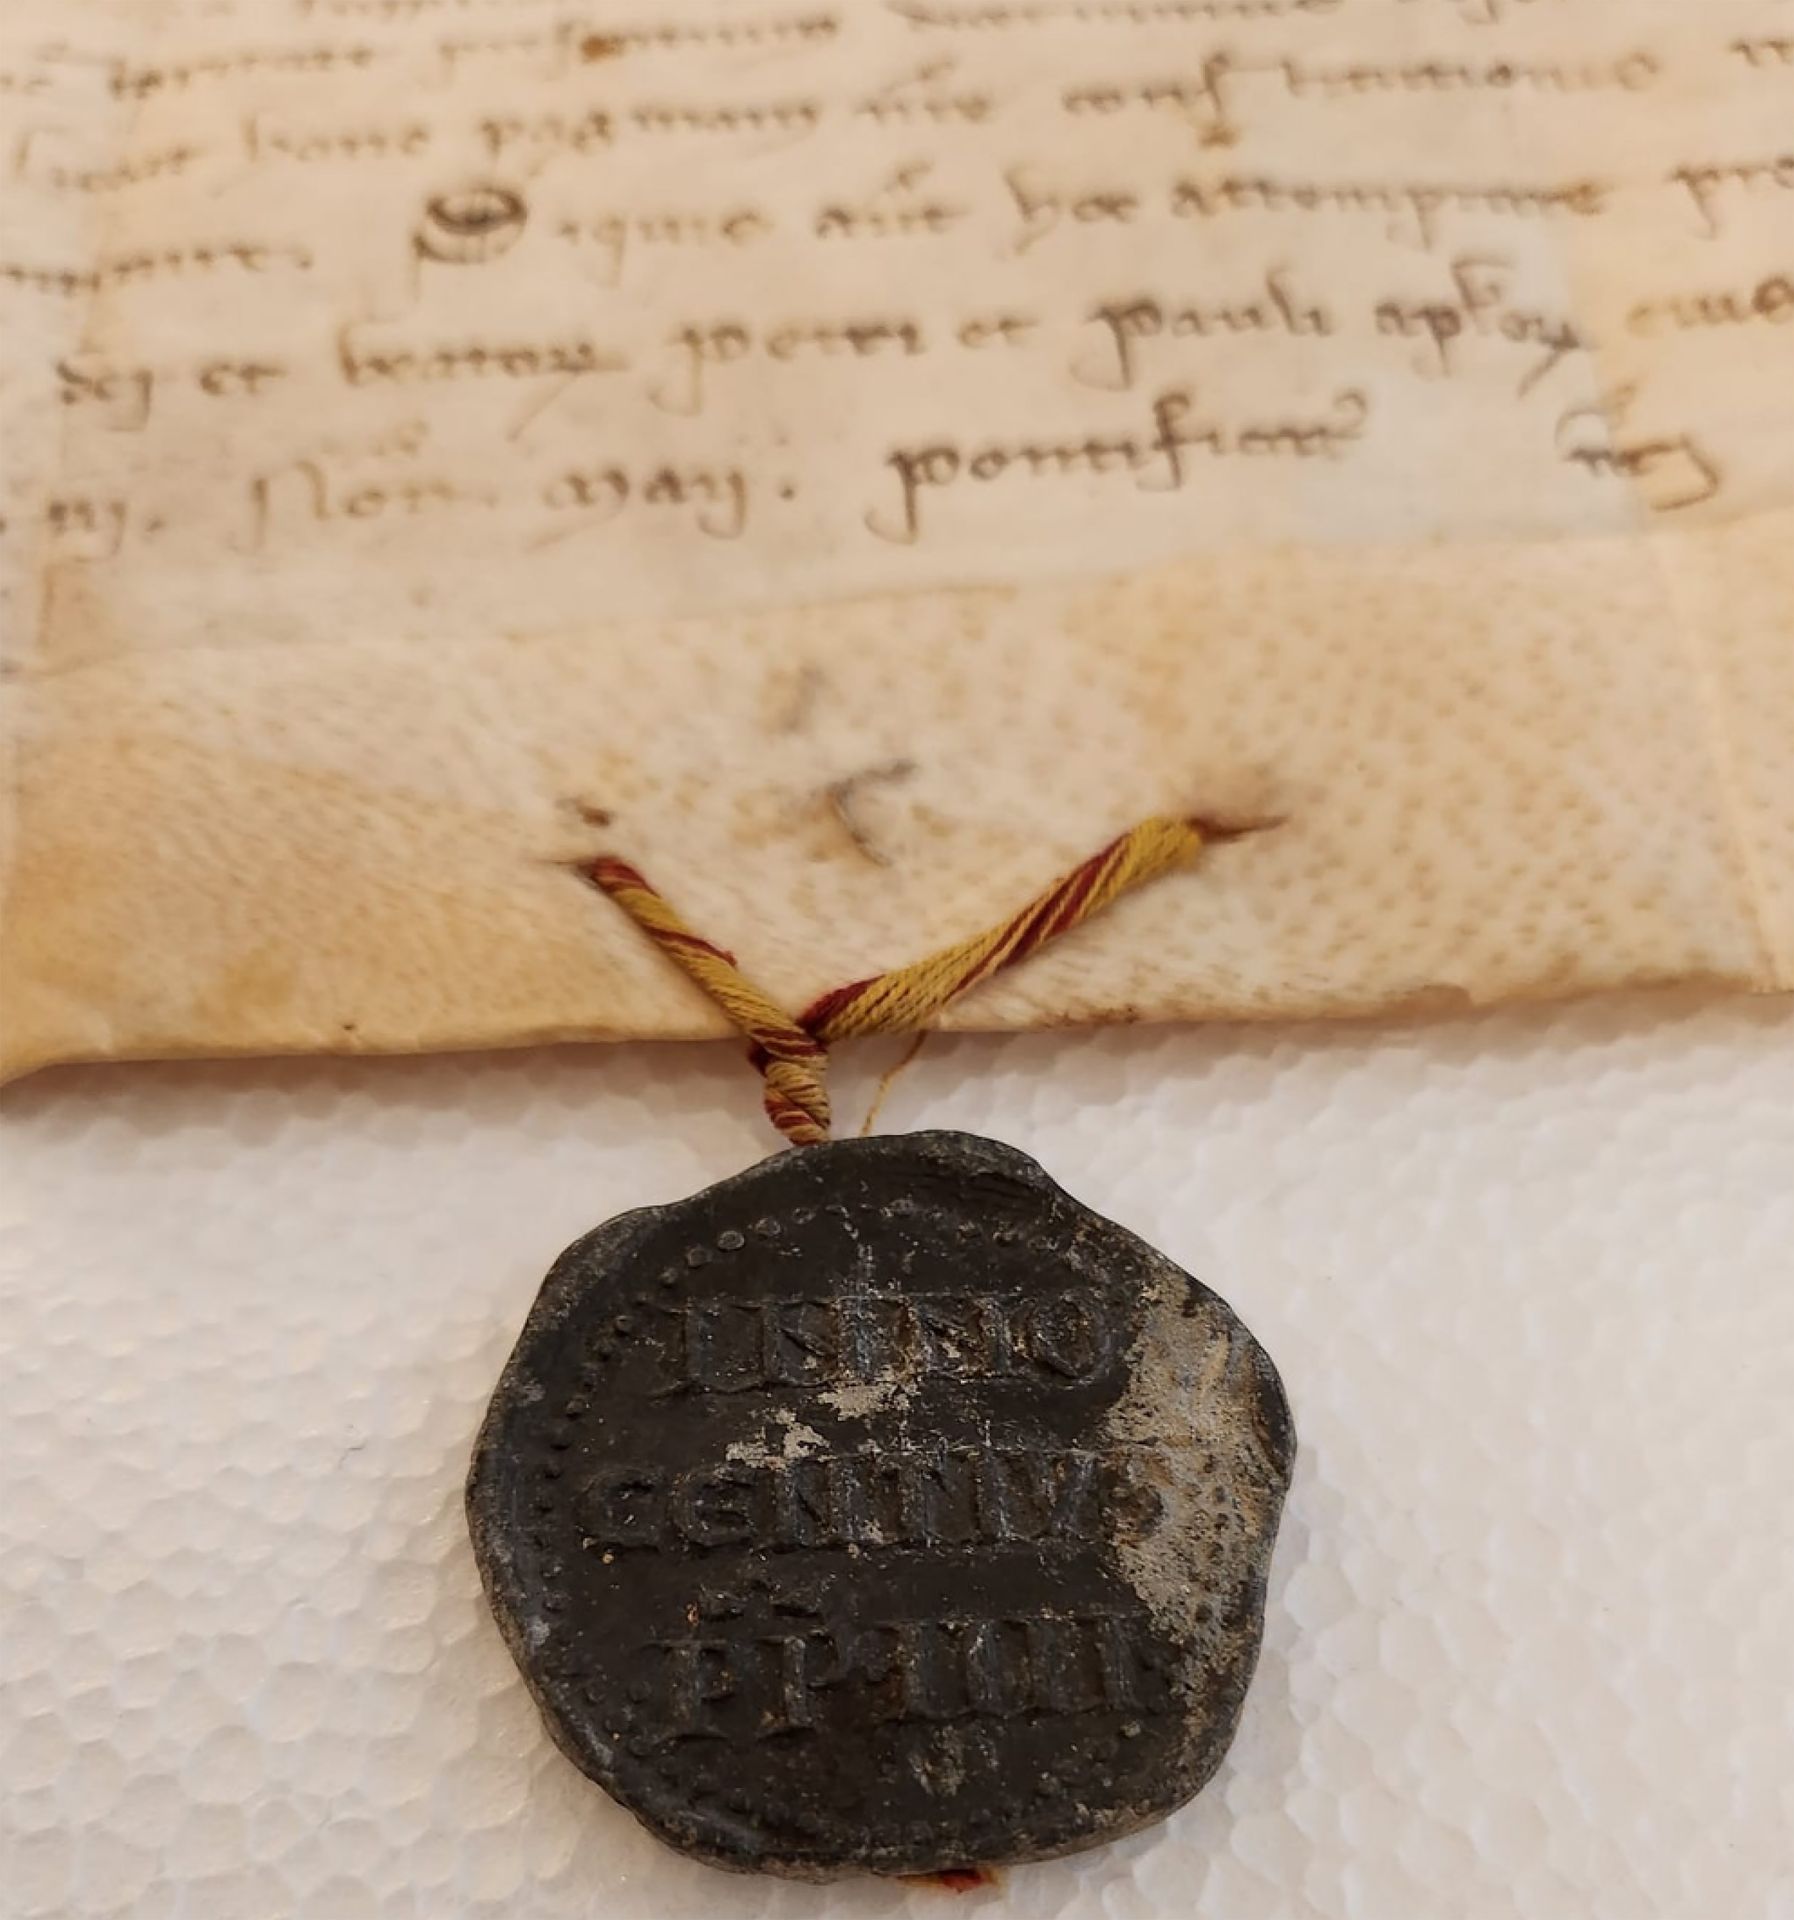 Rare letter of Pope Innocent IV, on parchment, year 1247 - Image 4 of 4